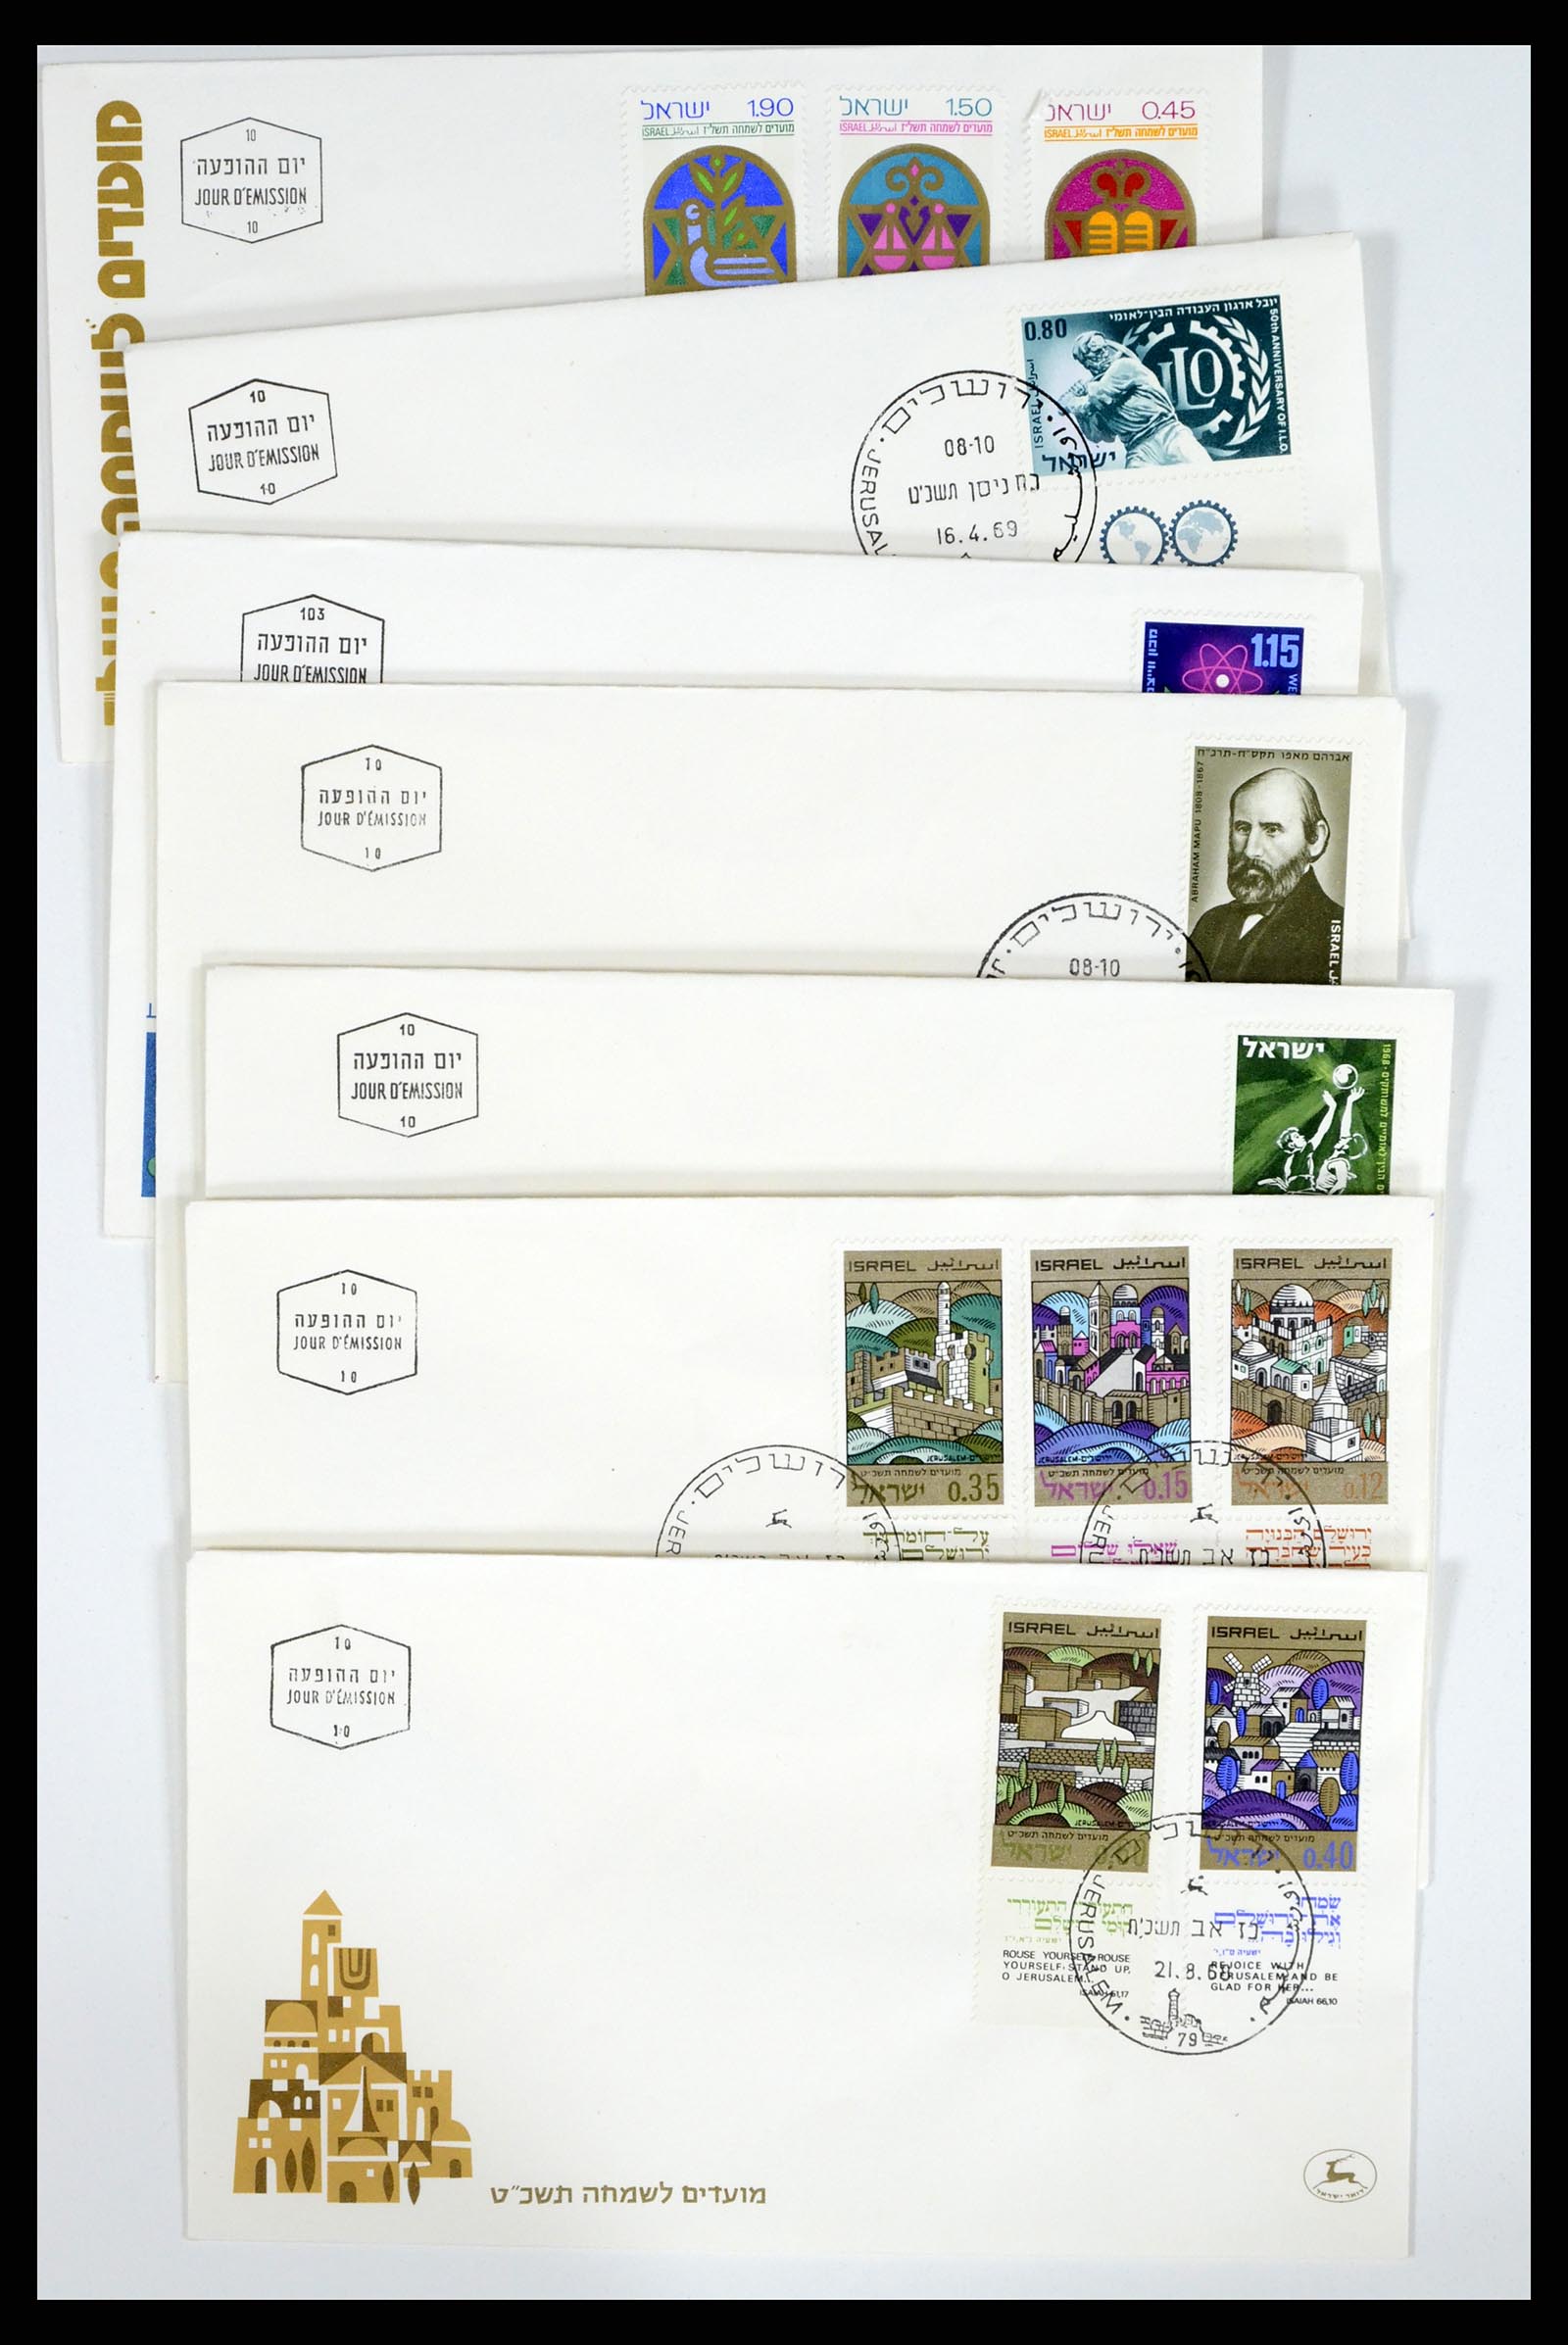 37711 012 - Stamp collection 37711 Israel first day covers 1970-2000.